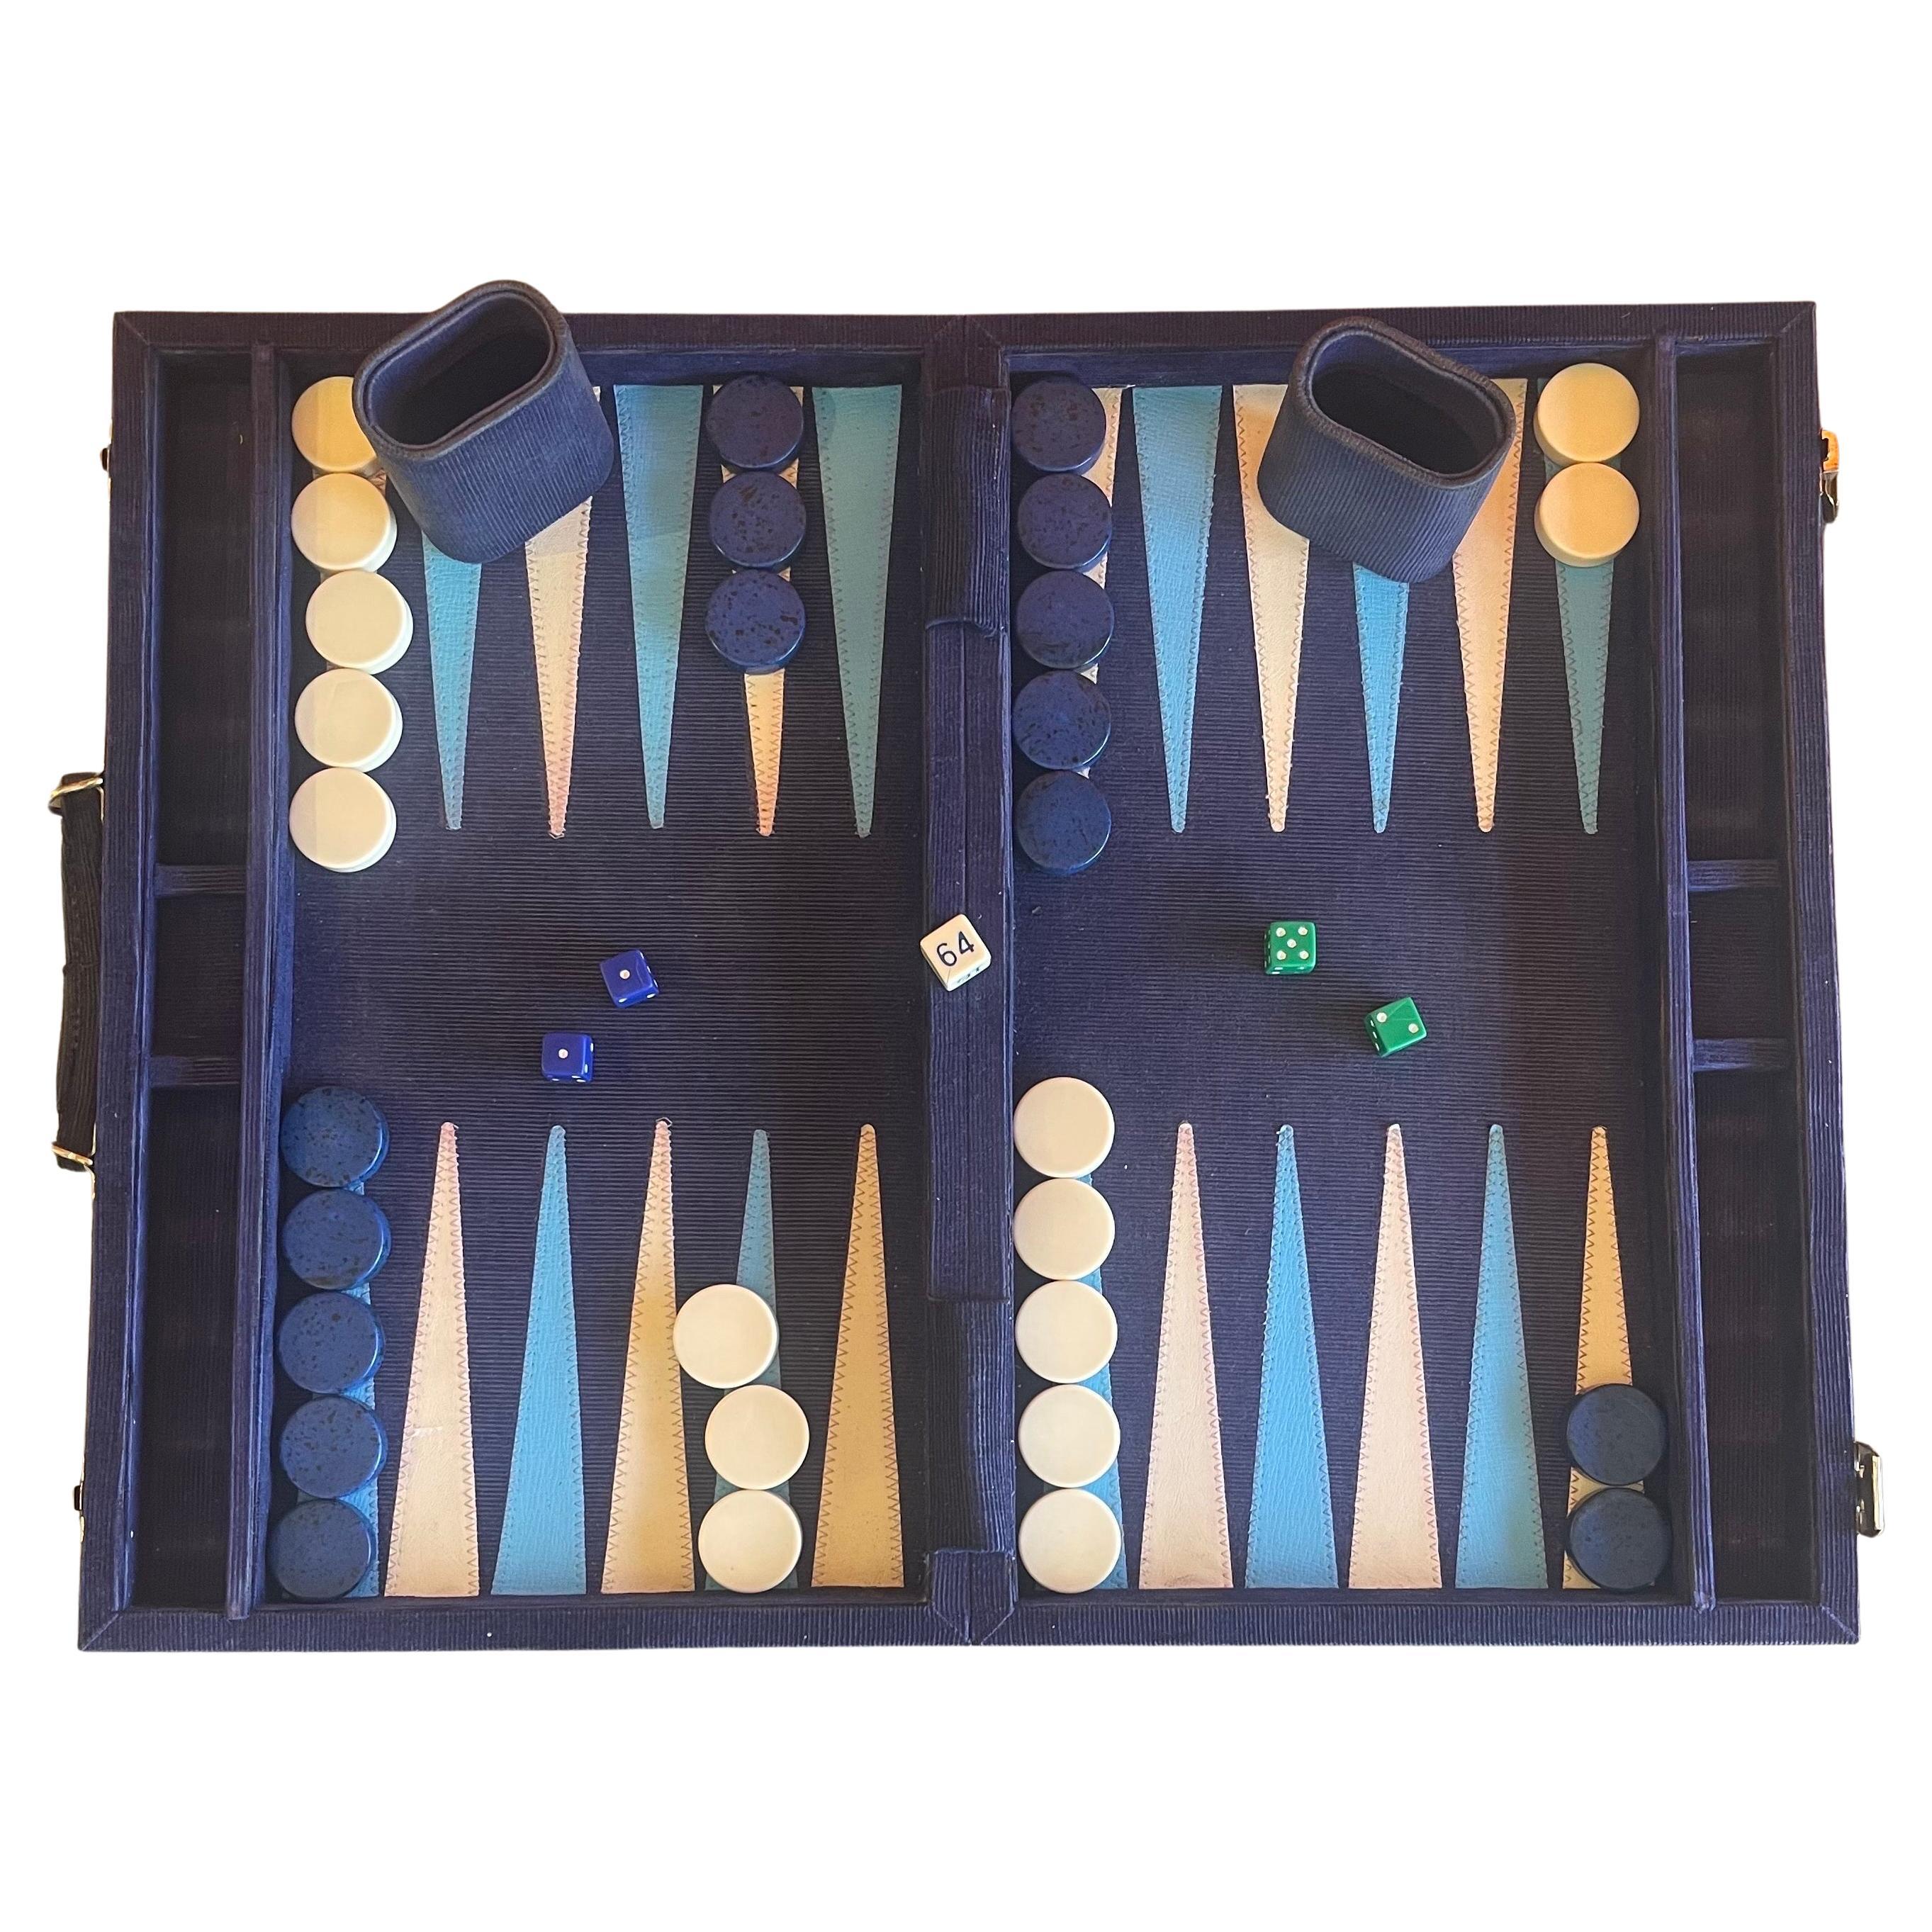 Vintage corduroy and bakelite backgammon set, circa 1970s. Set is complete with a foldable case / board with blue corduroy fabric, 30 bakelite checkers (white and deep blue in color, 1.5